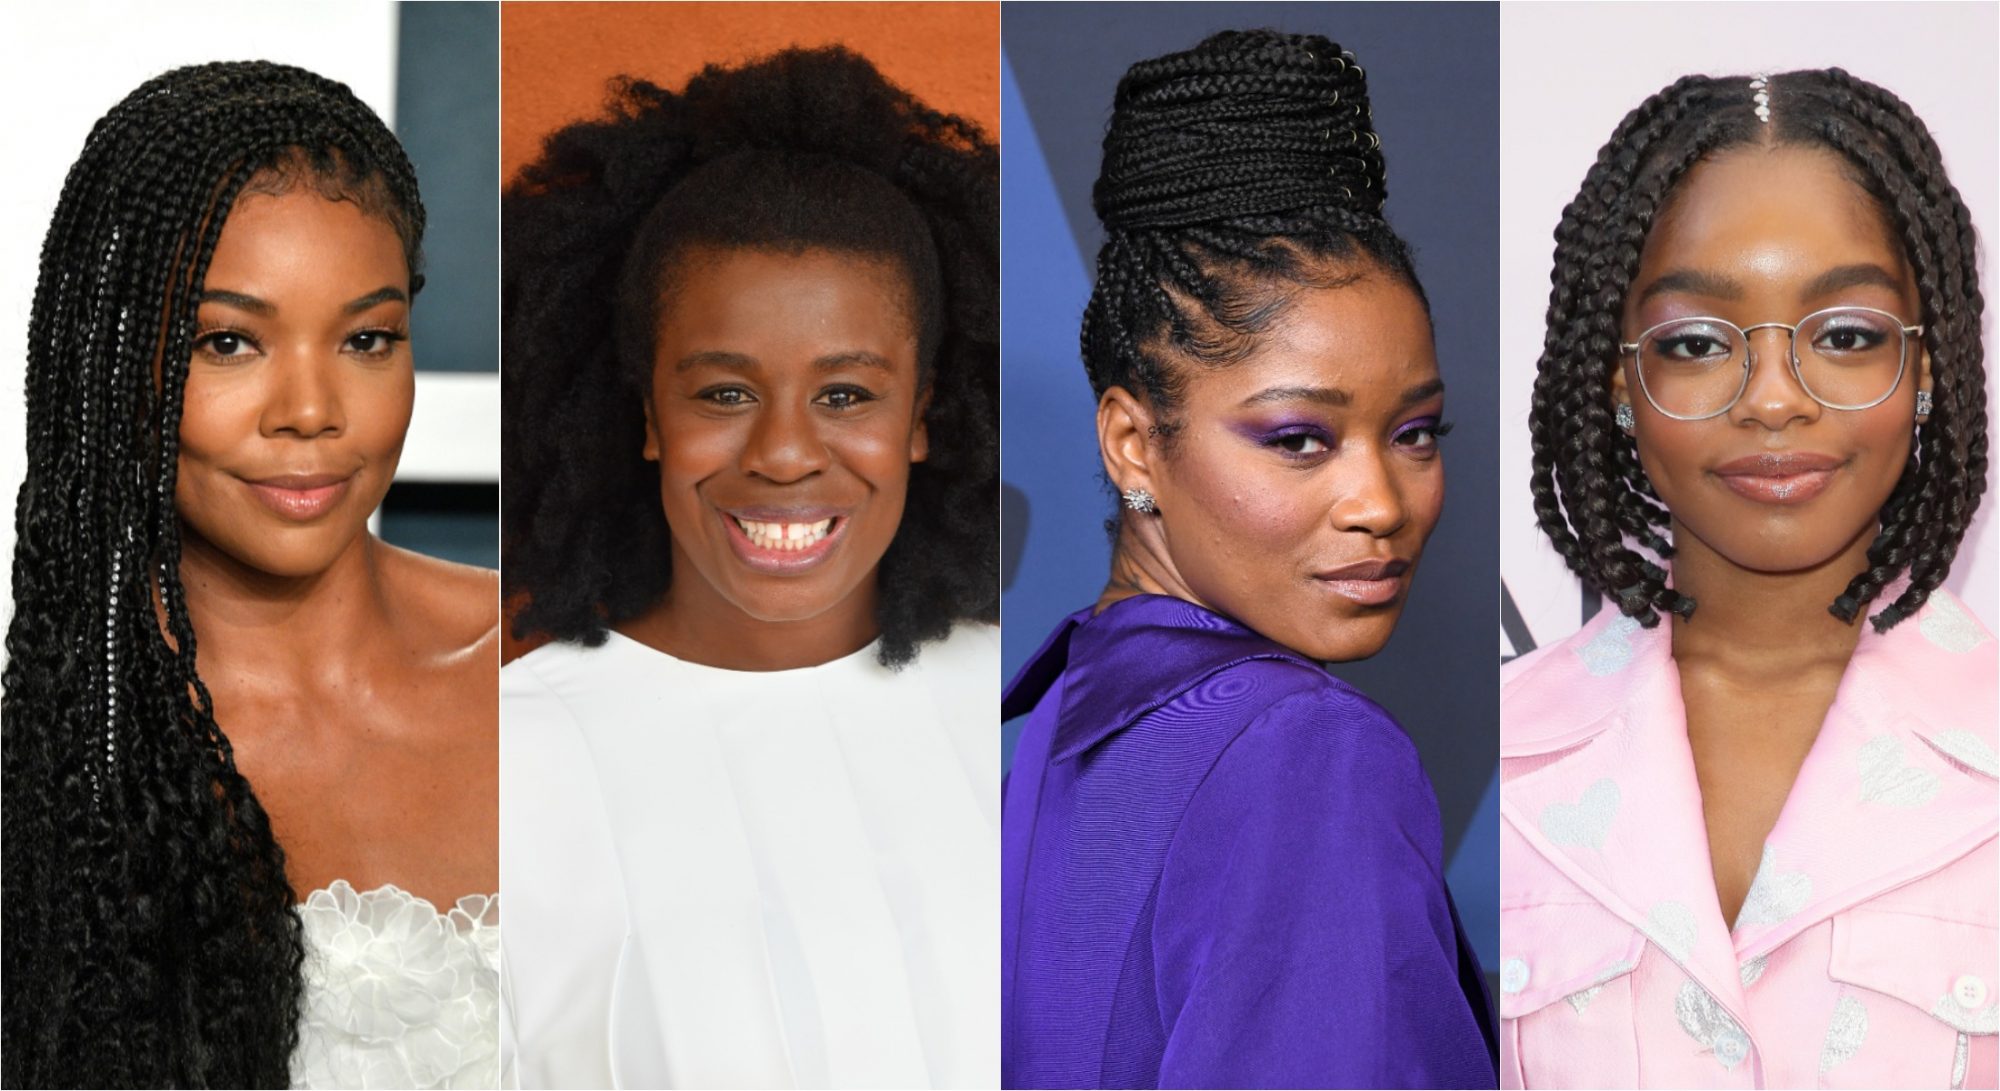 Keke Palmer Gabrielle Union And Others Are Speaking Up About Black Hair Discrimination Hellogiggles